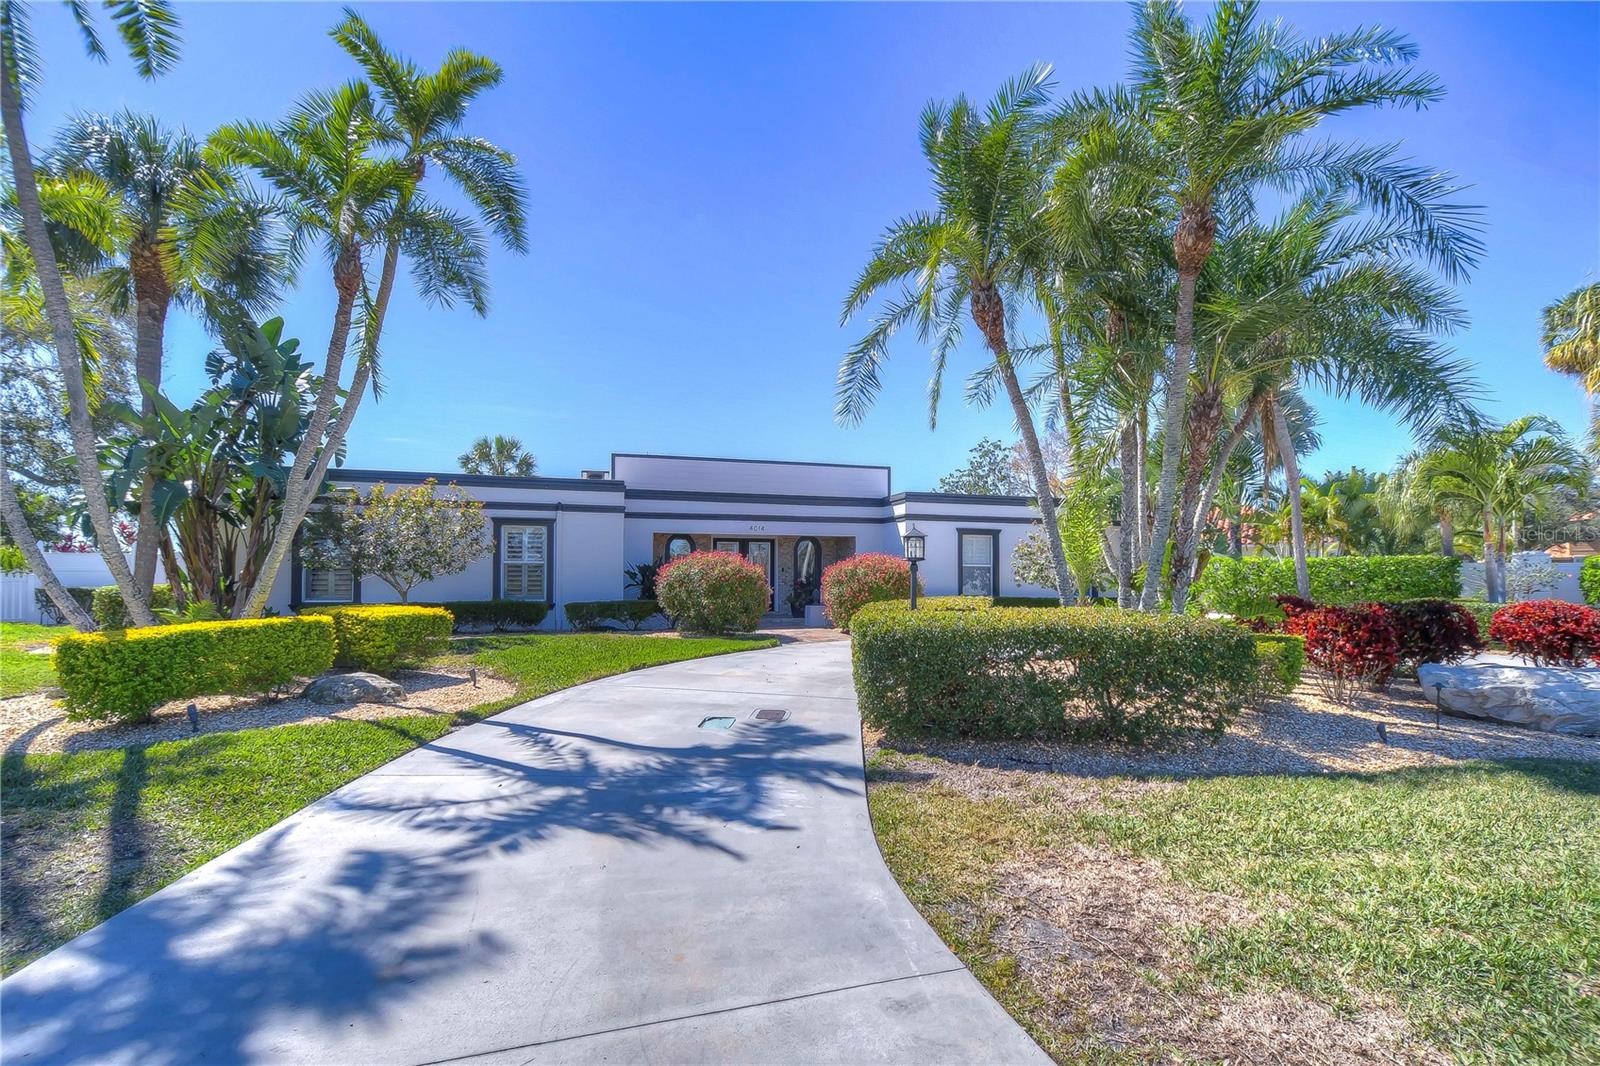 Welcome to 4014 Dana Shores Drive!